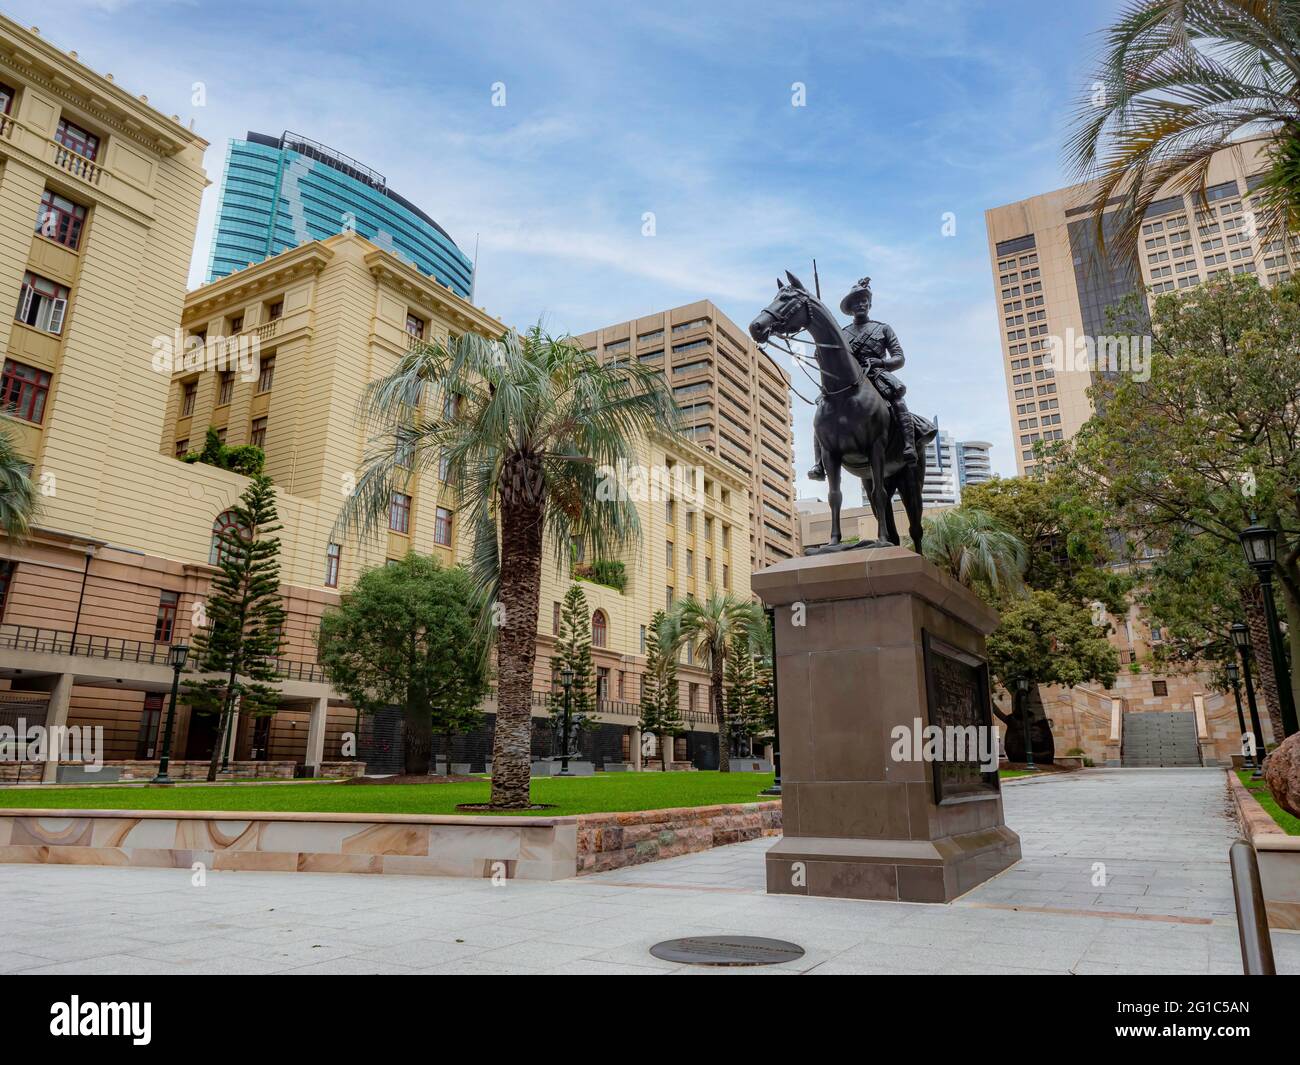 General view of the Anzac Square in Brisbane Australia. Park with trees and palm trees, green grass. Office buildings and hotels in the background. Stock Photo